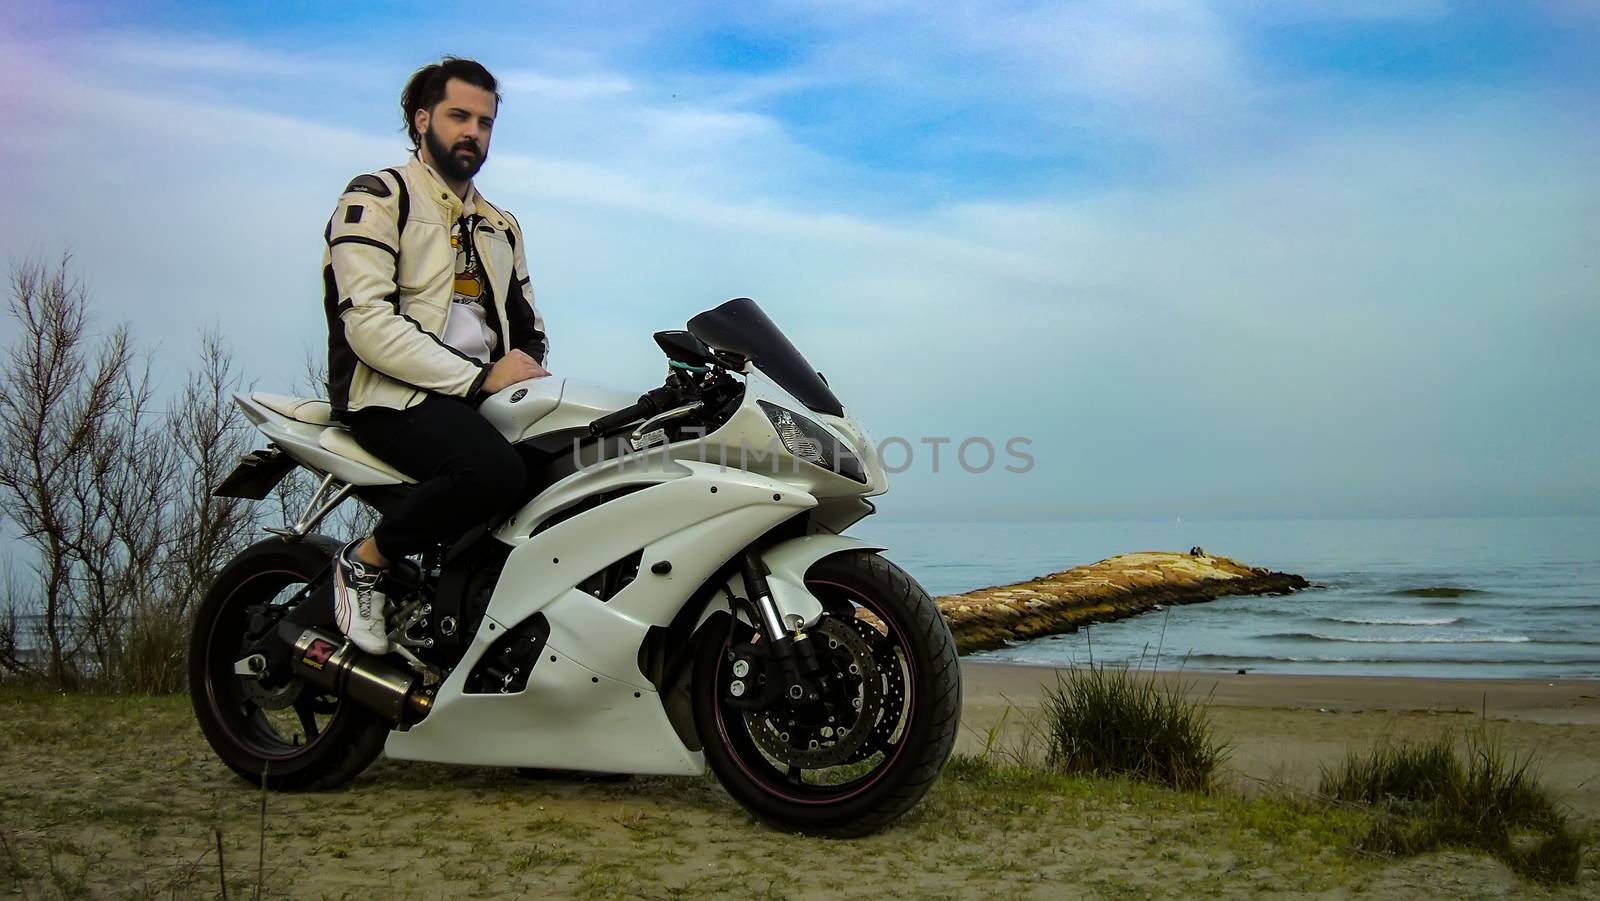 Portrait of a Road biker that rides his motorbike in a beach